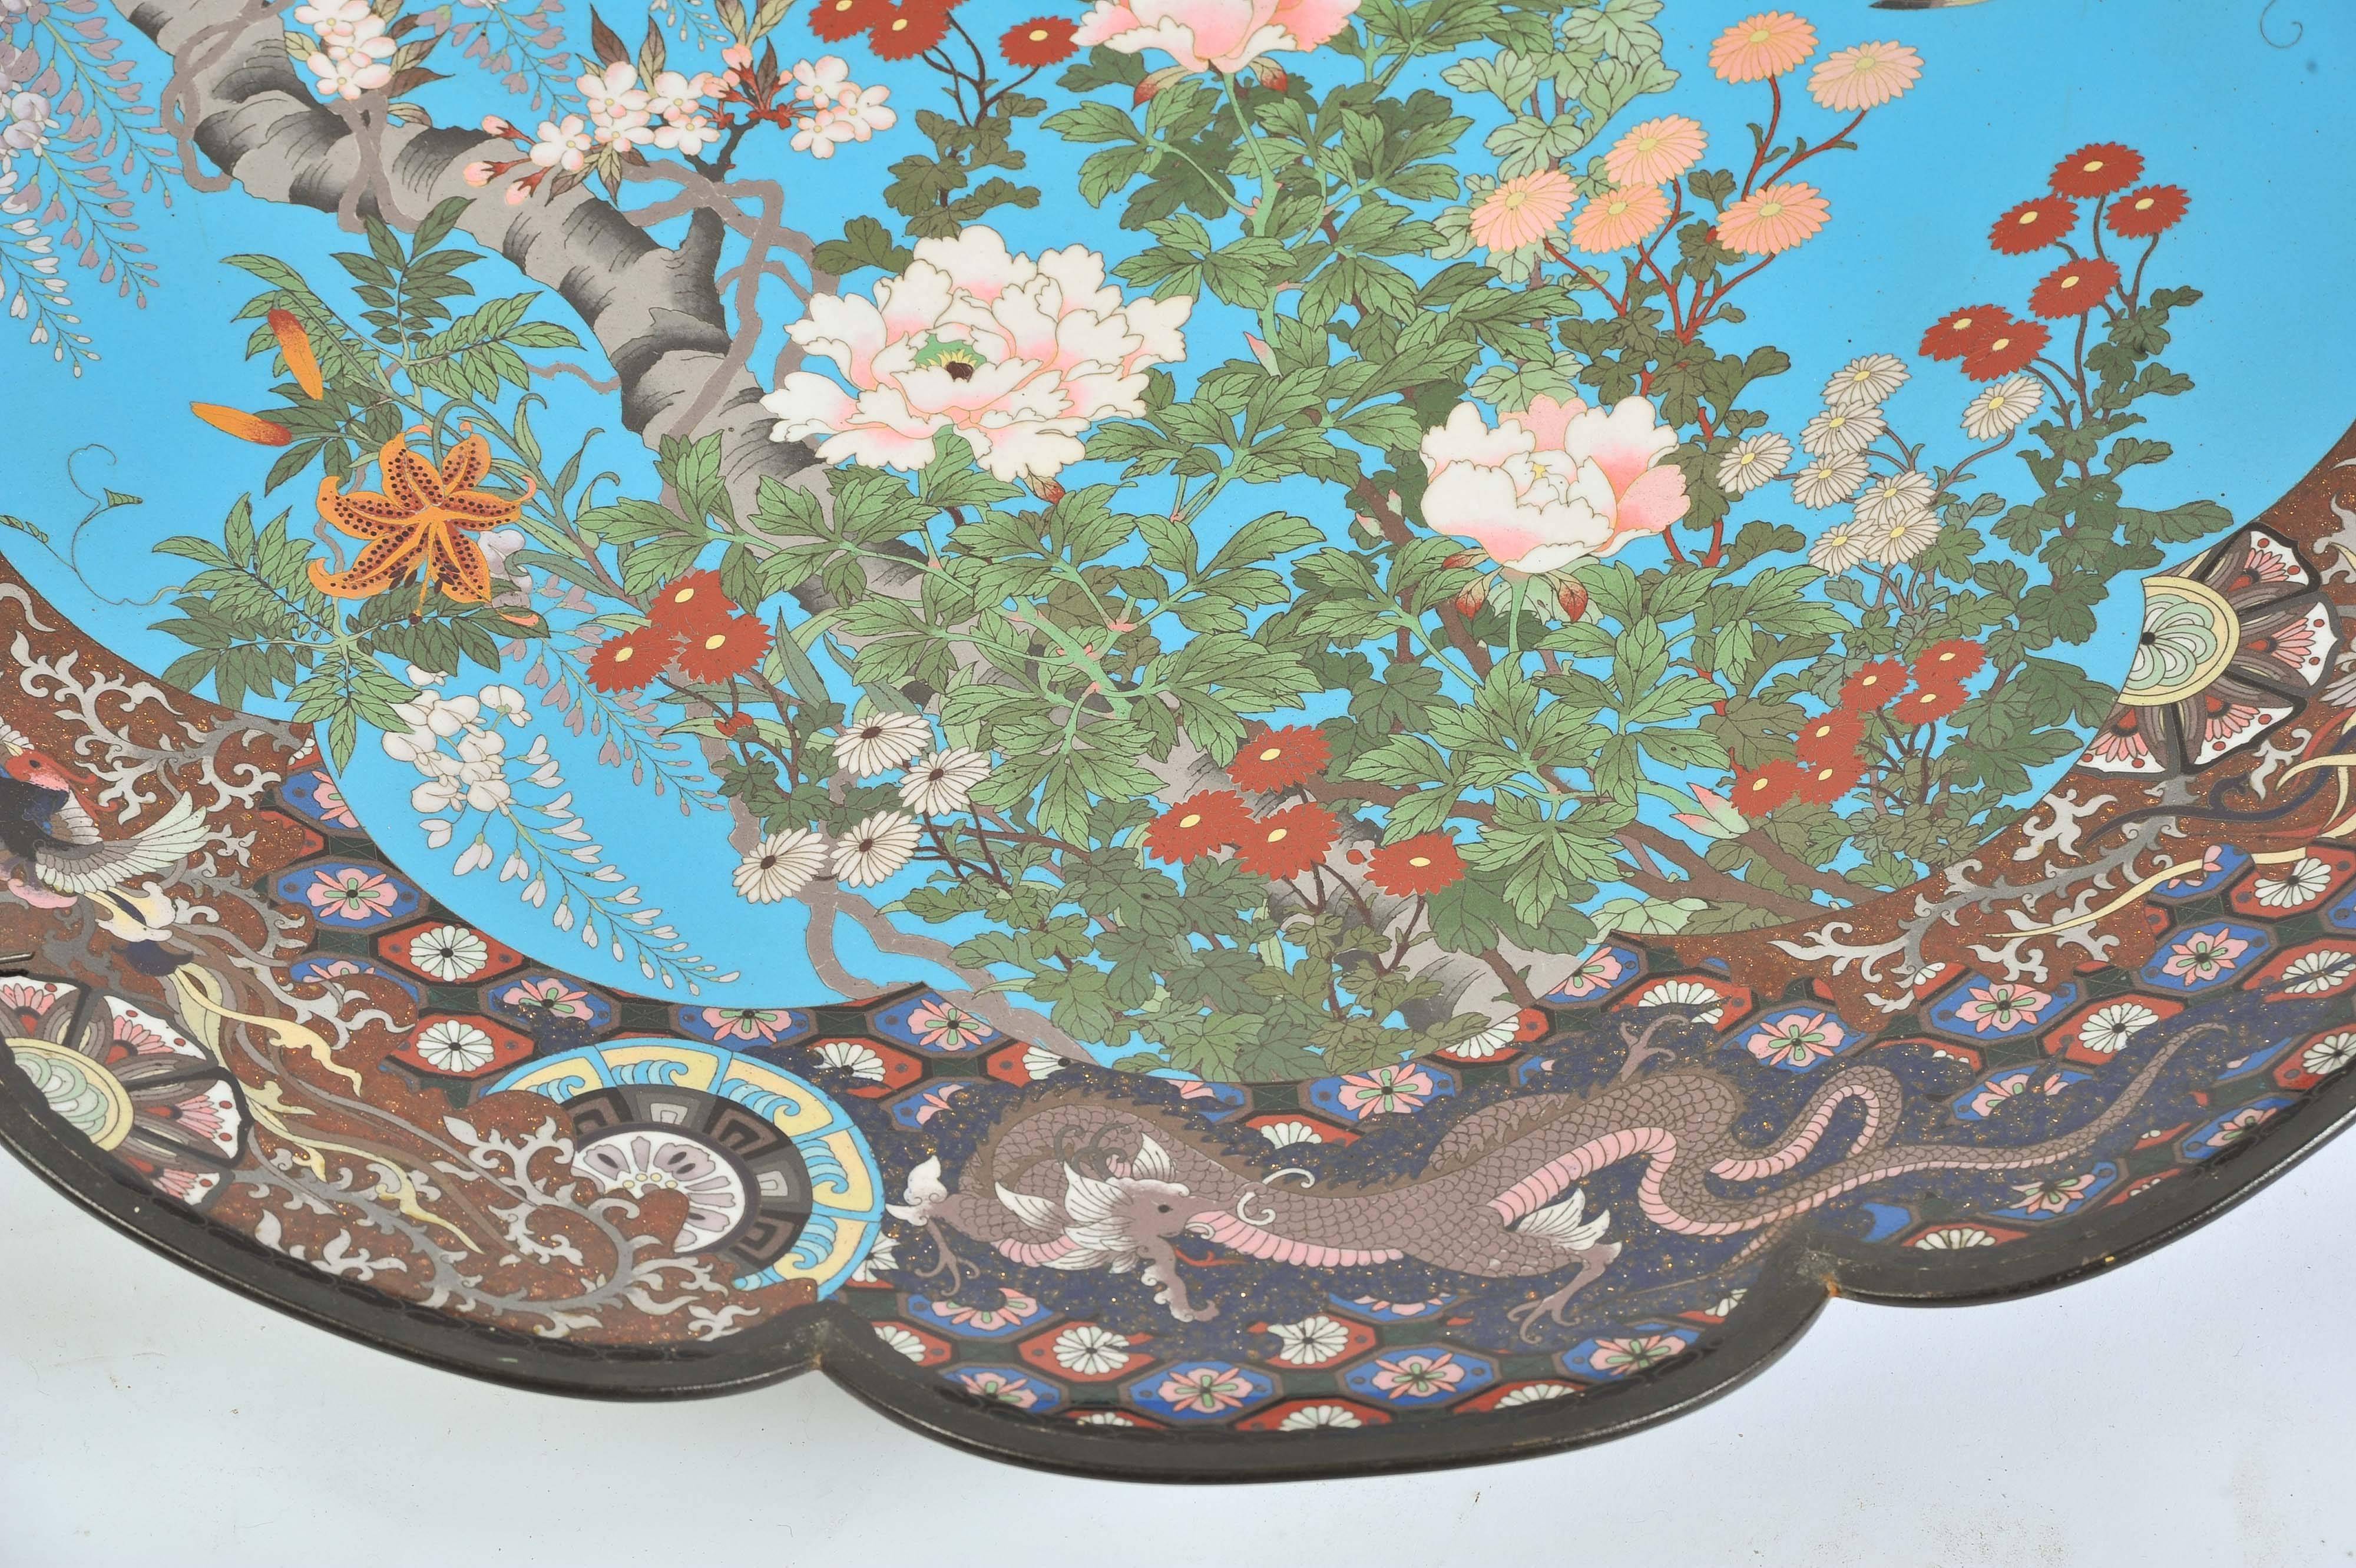 A very impressive large Meiji period (1868-1912) Japanese cloisonné enamel charger. Having a scalloped edge, the margin depicting mythical dragons and birds amongst various classical motifs and foliage. The centre with a large eagle like bird flying